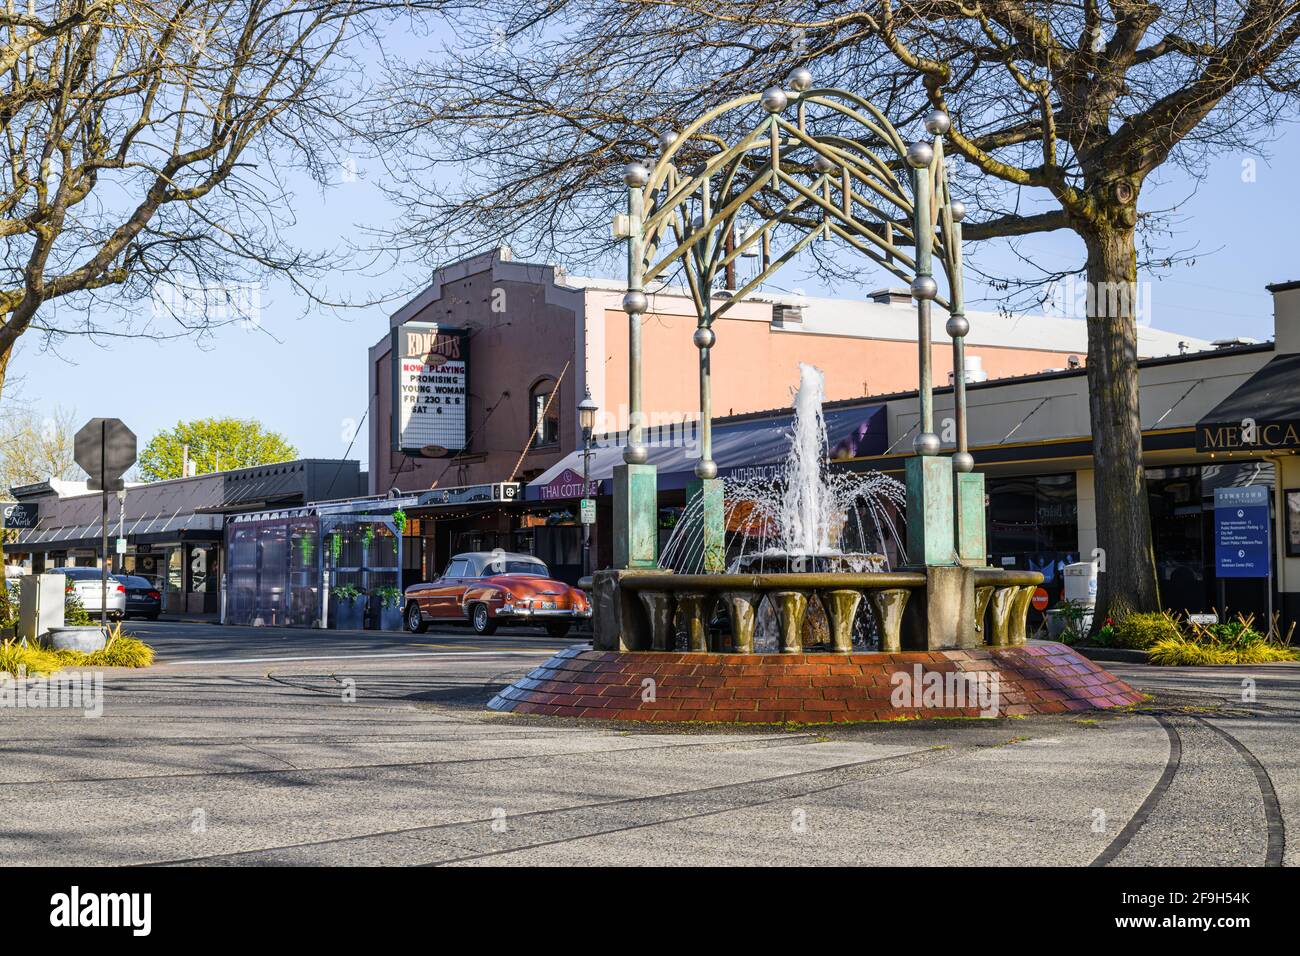 Timeless scene in Downtown Edmonds on a spring day finds the Edmonds Cedar Dreams Fountain  backed by the Edmonds Theater, and a classic Chevrolet Stock Photo